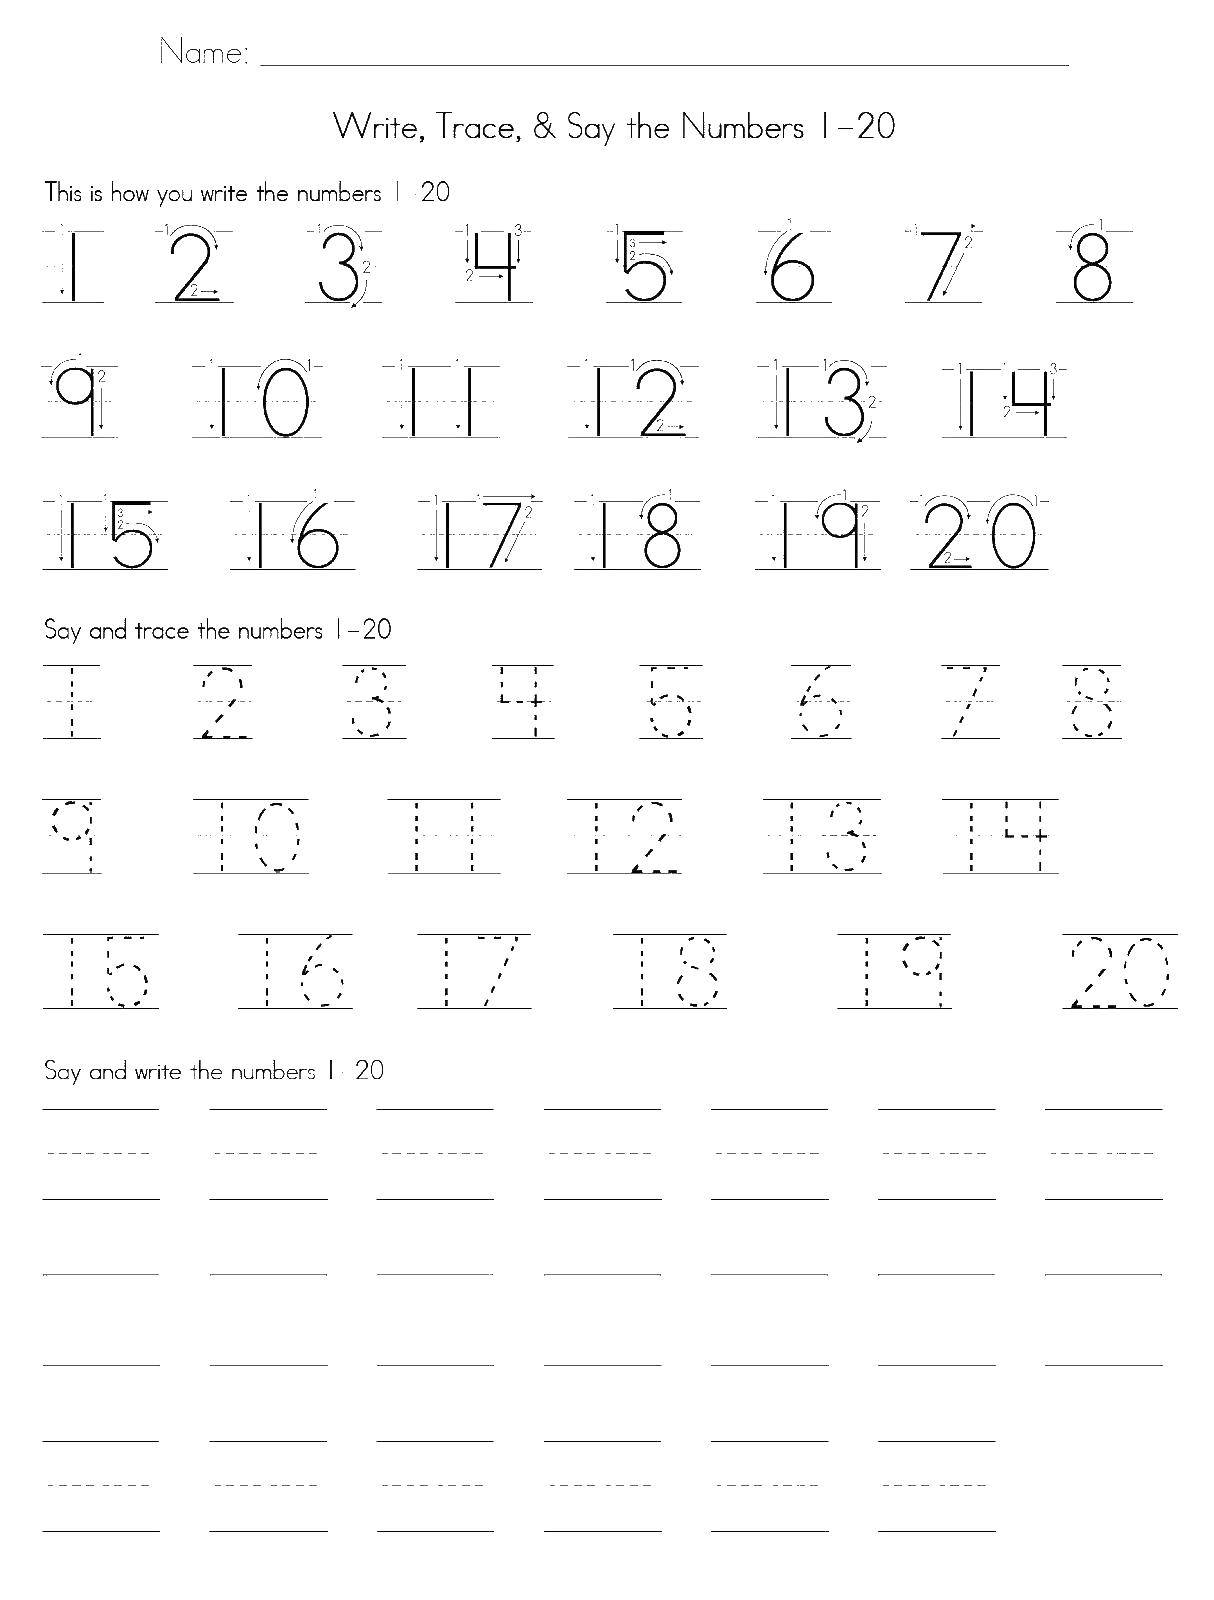 Coloring Learn how to write numbers. Category numbers. Tags:  numbers.